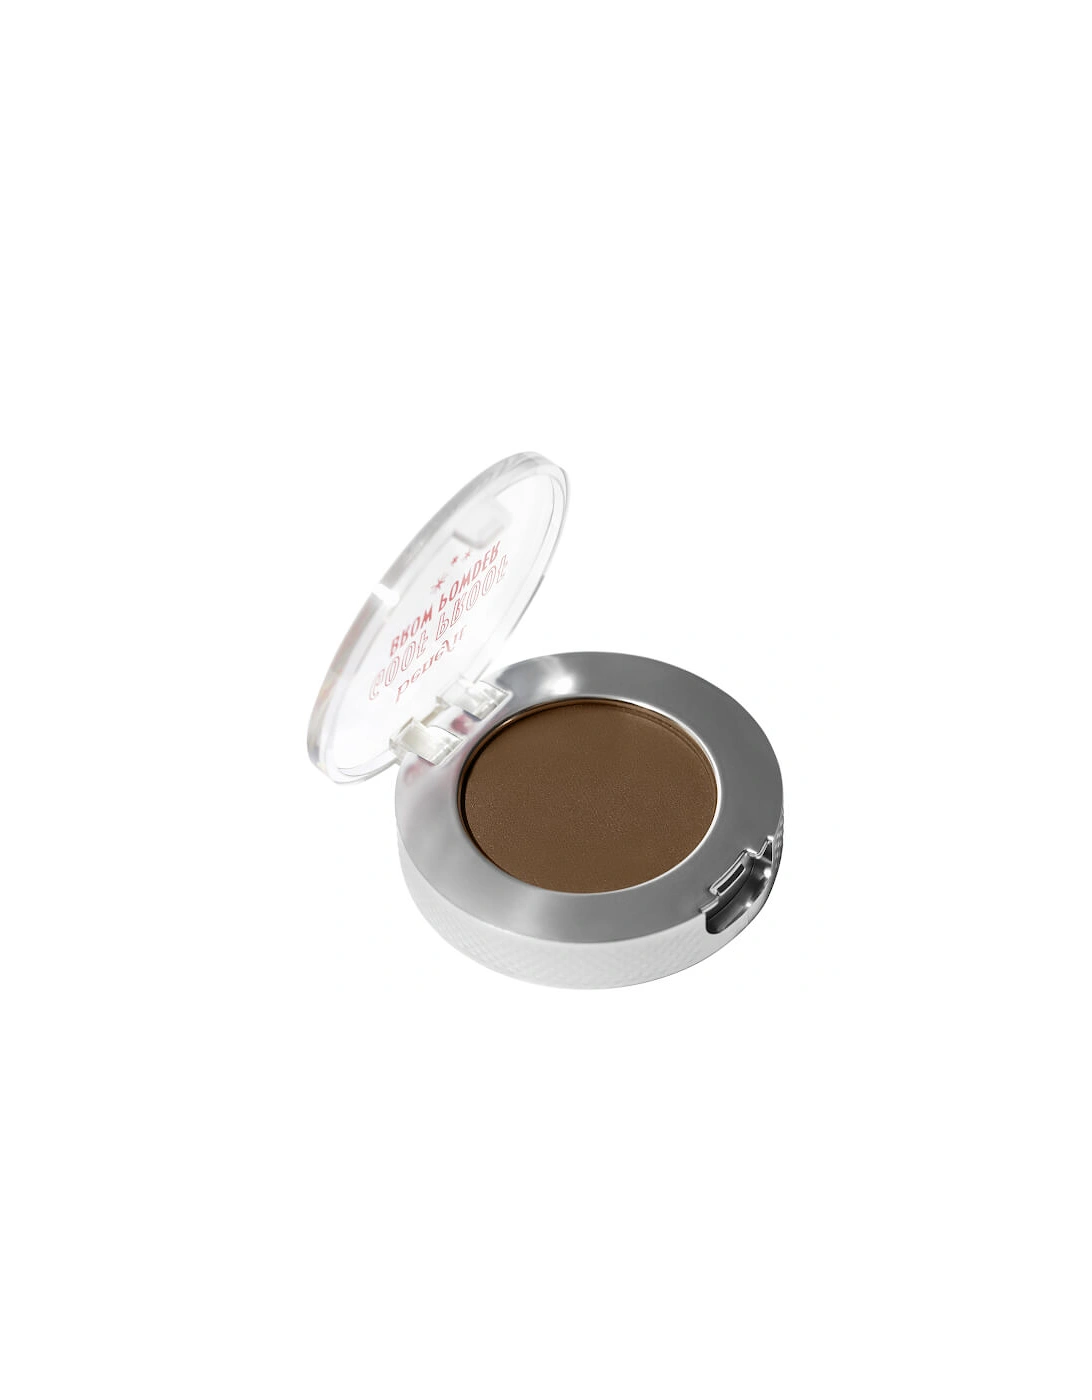 Goof Proof Easy Brow Filling Powder - 01 Cool Light Blonde